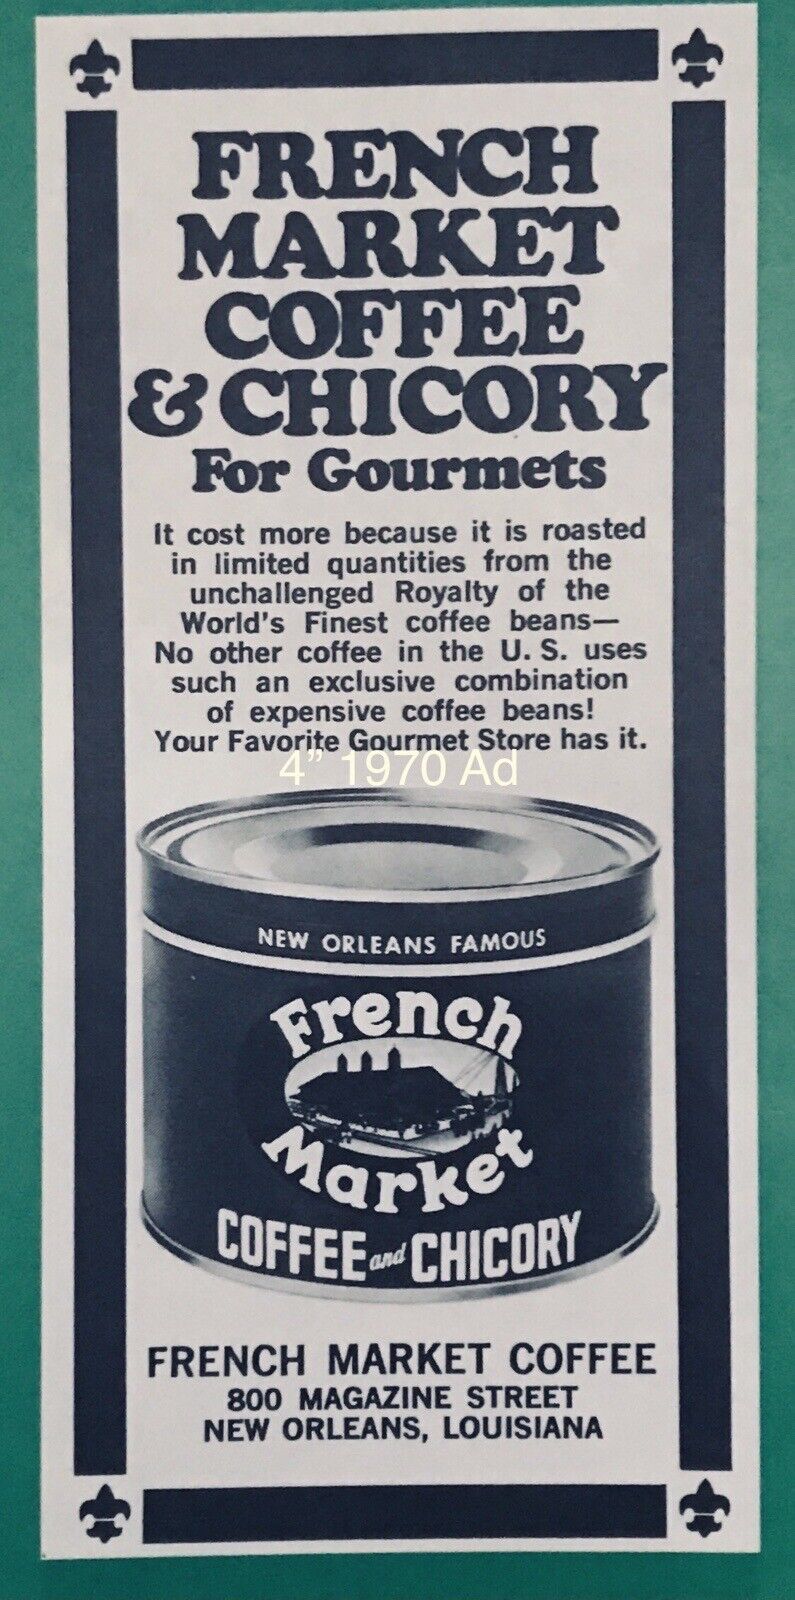 1970 VINTAGE AD French Market Coffee “for Gourmets”  4” x 2” Promo Art